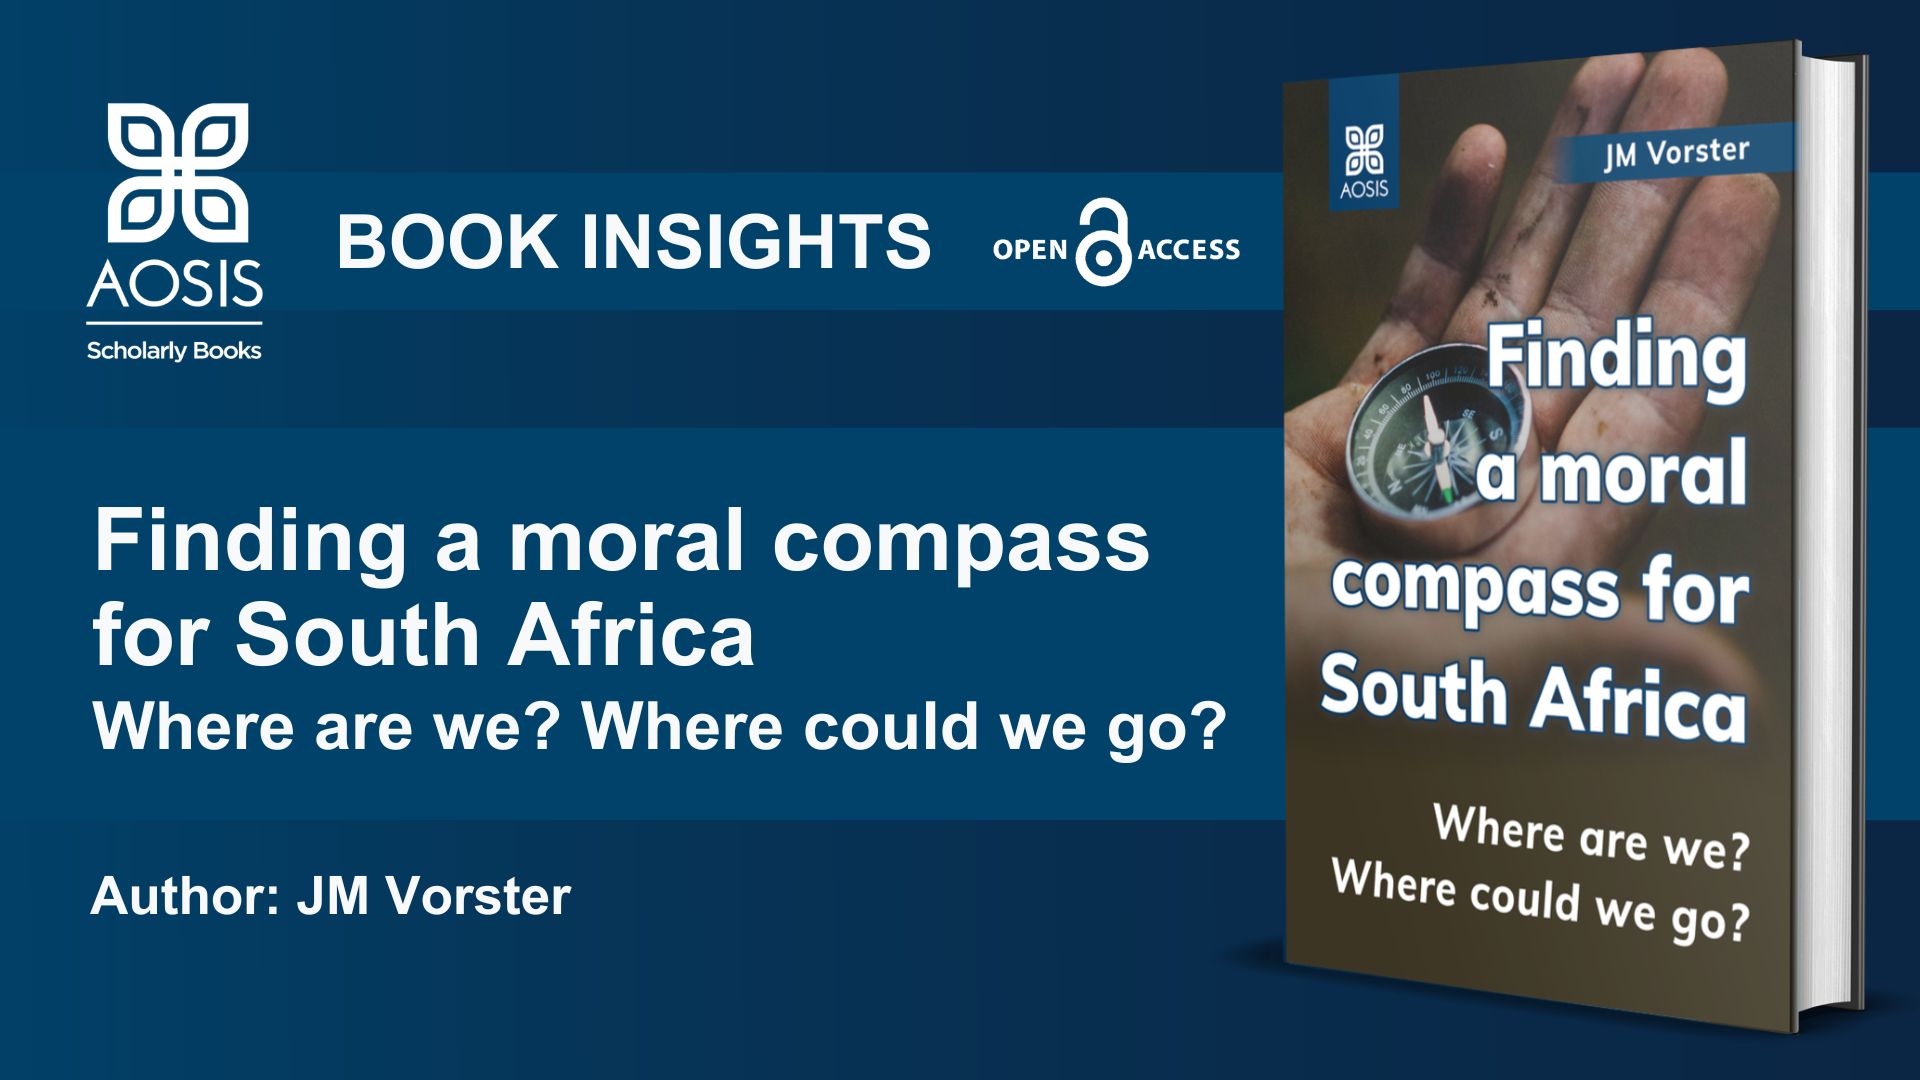 Finding a moral compass for South Africa